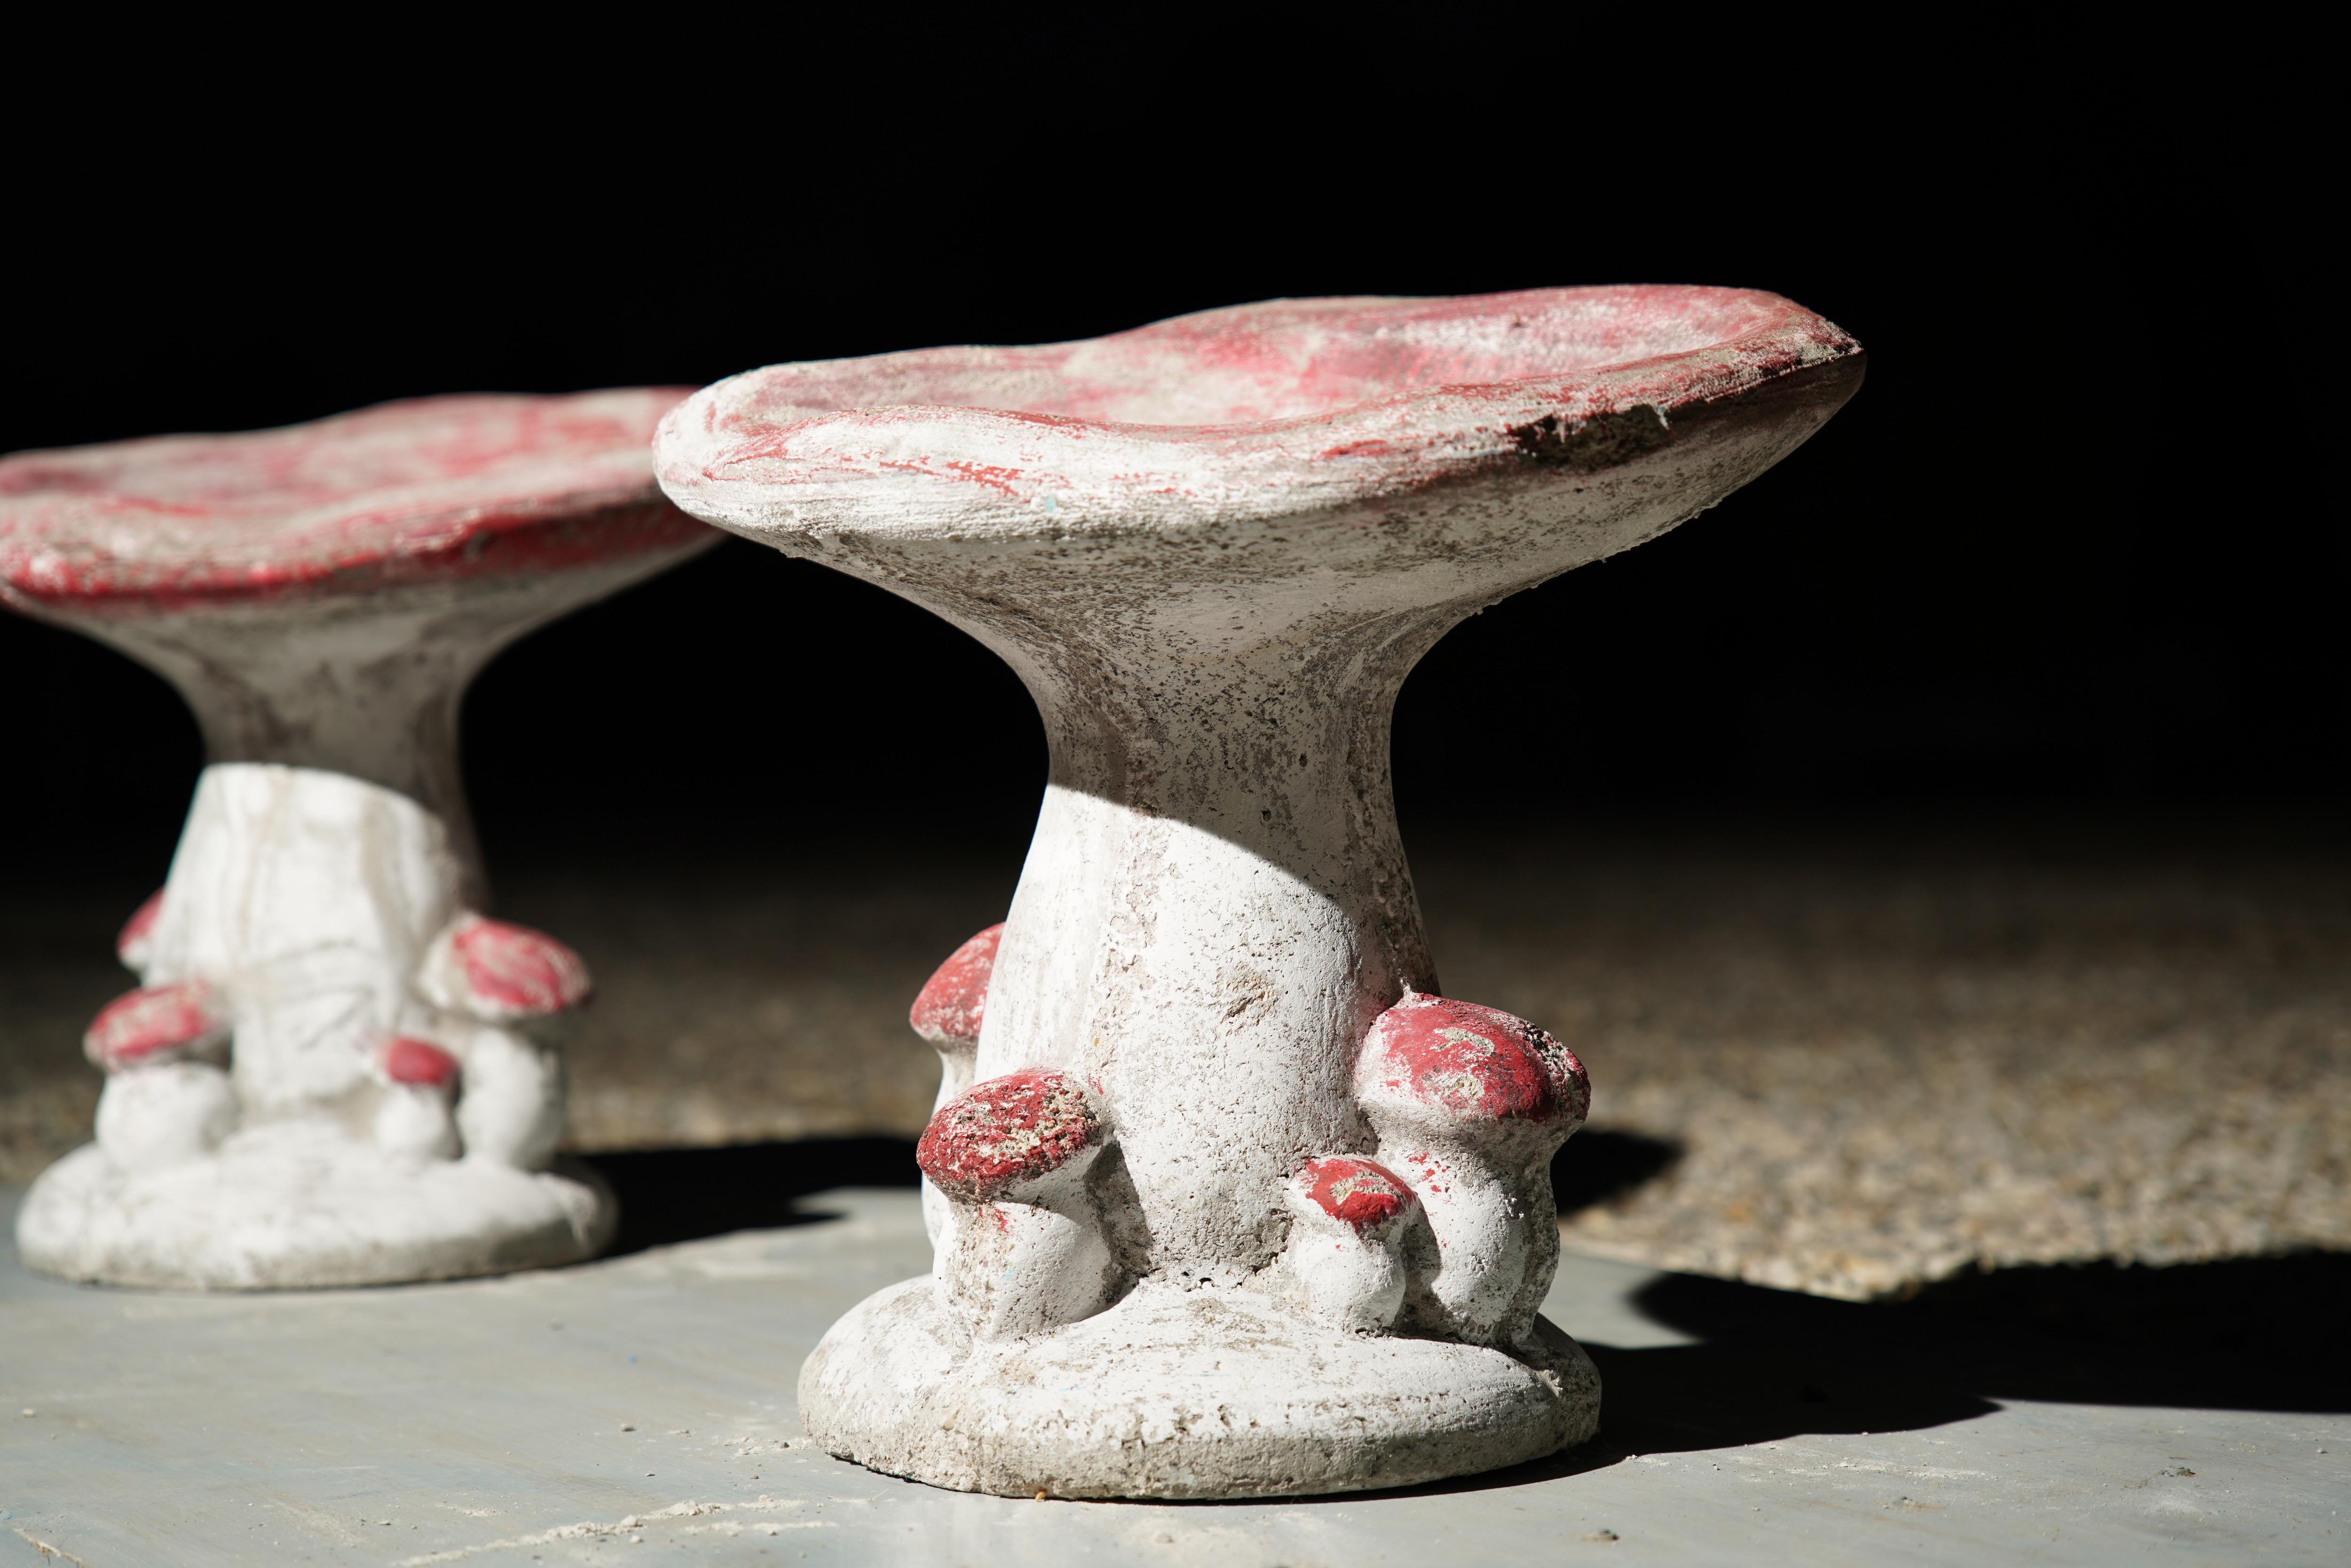 Vintage French Concrete Mushroom Stools, 1950s For Sale 11